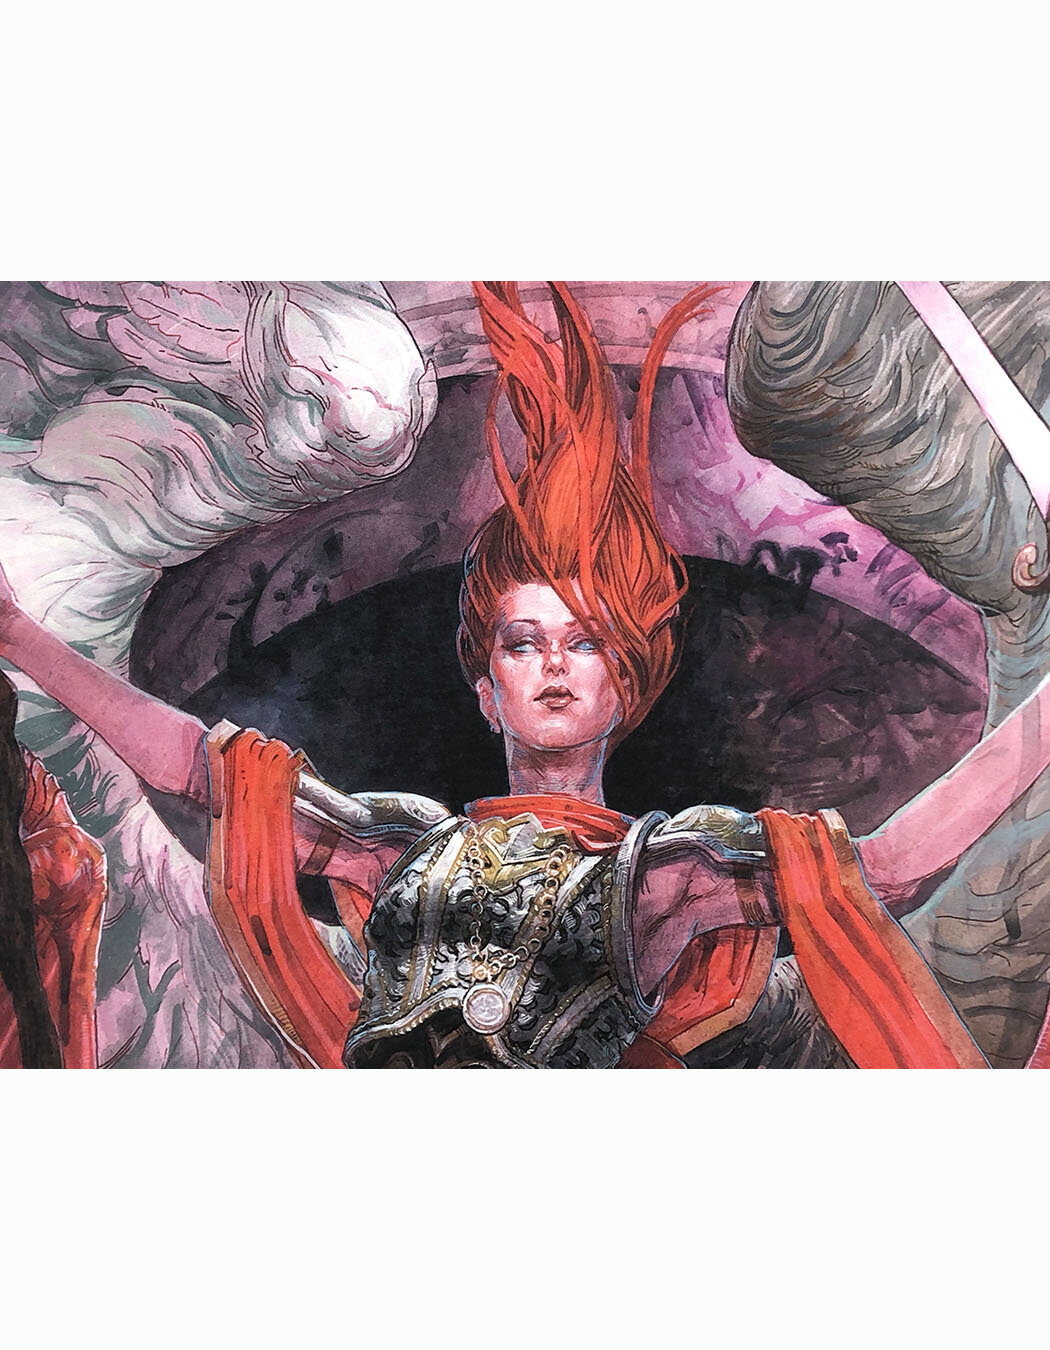 Details about   MTG Kaalia Of The Vast Playmat 14x24 Inch TCG CCG Single Player Cards Game Mat